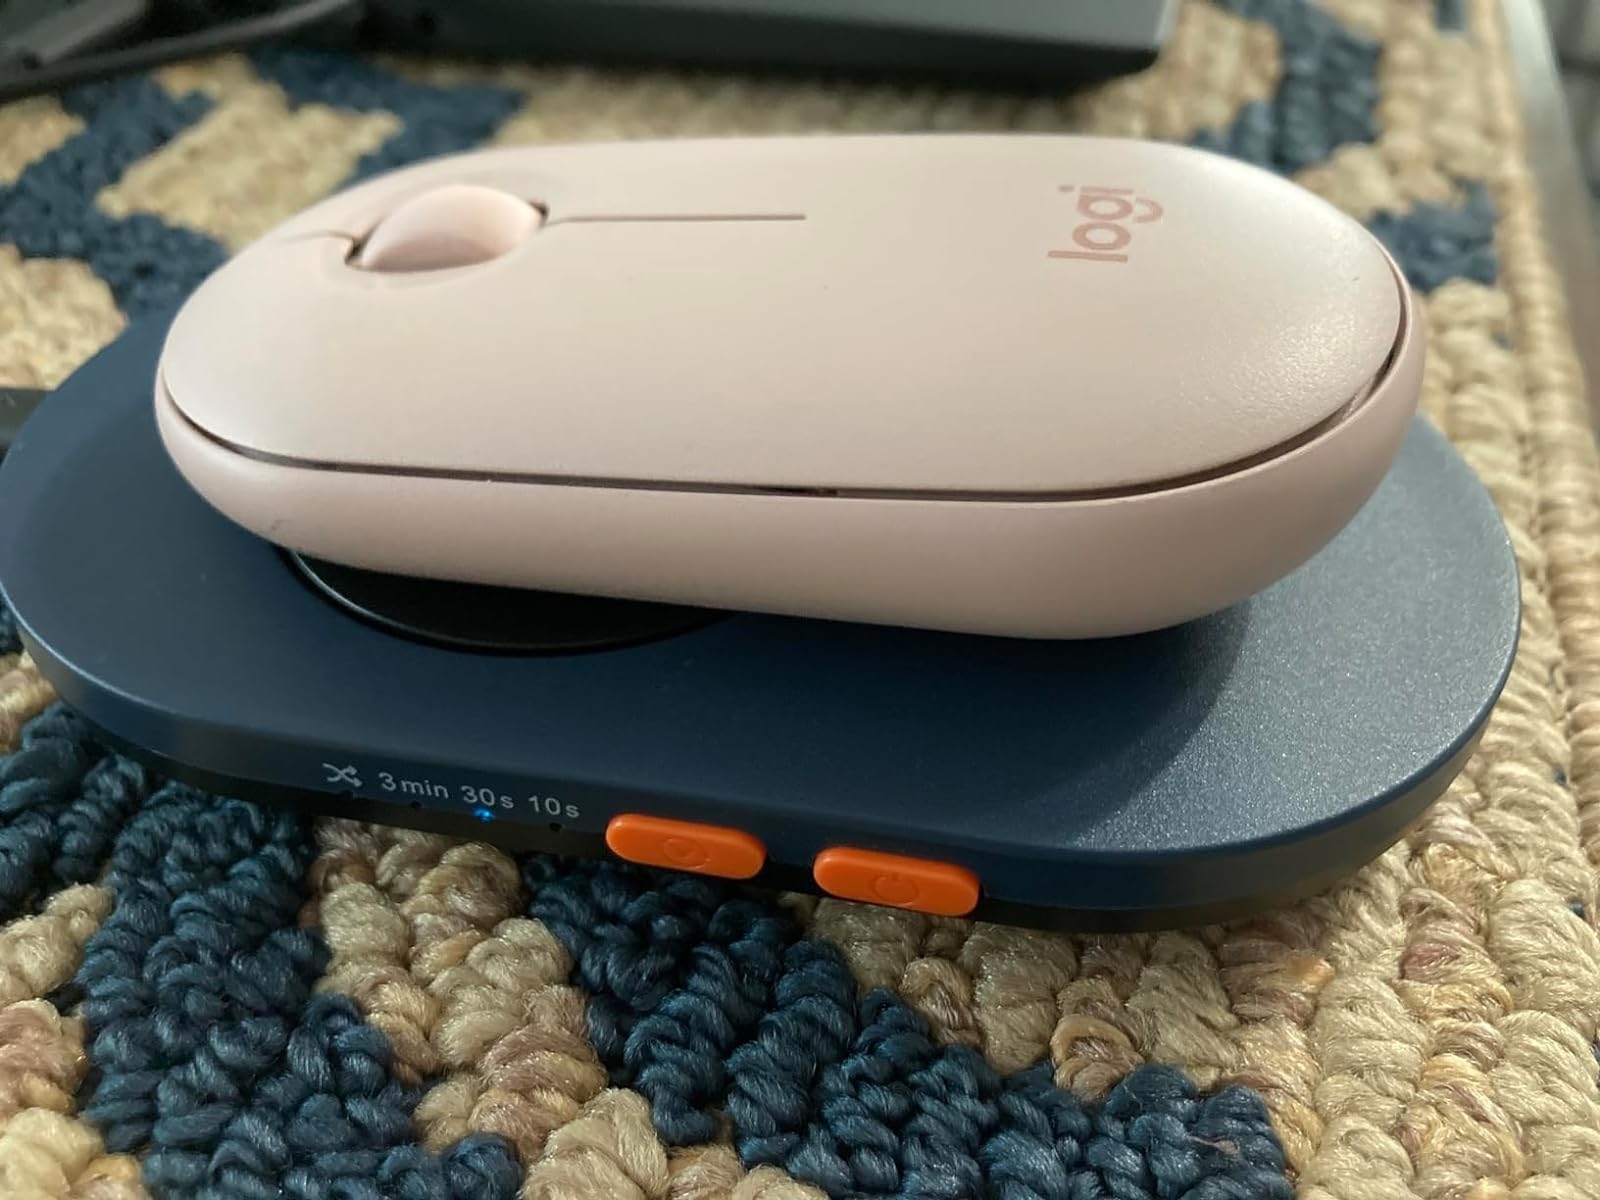 A wireless mouse on a charging pad placed on a woven surface